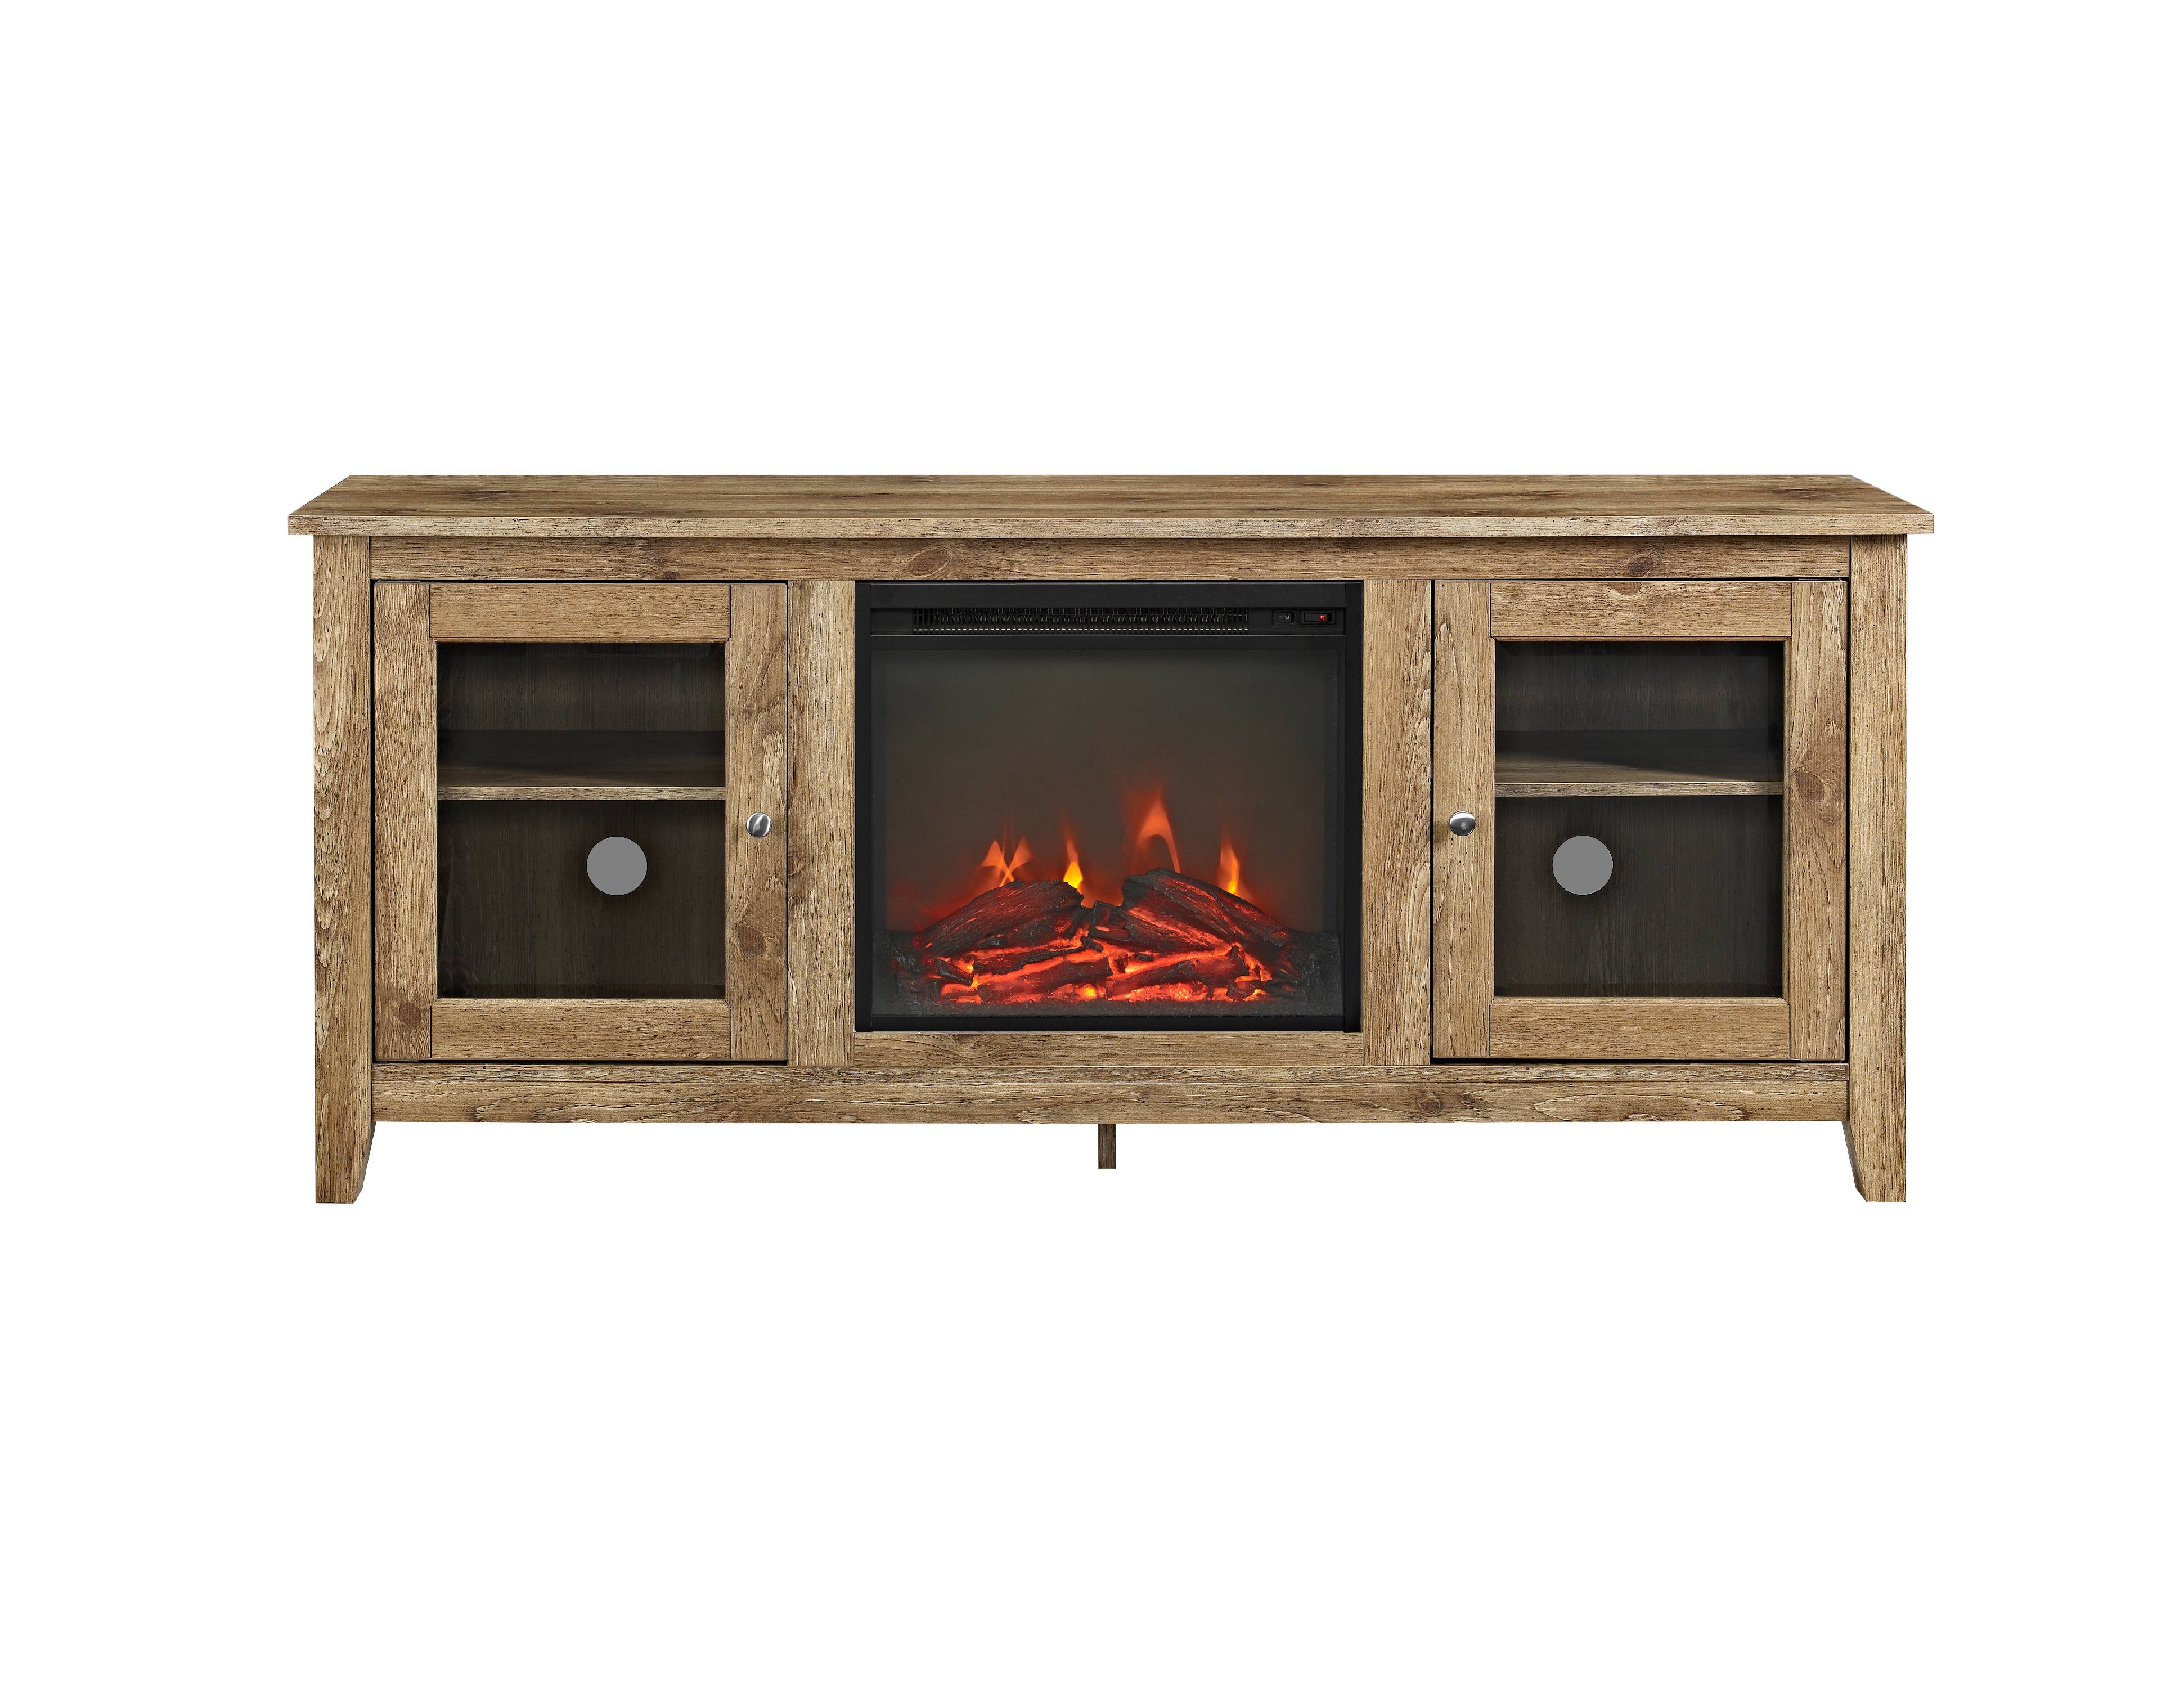 Walker Edison Barn wood Fireplace TV Stand for TVs up to 60" - image 3 of 10